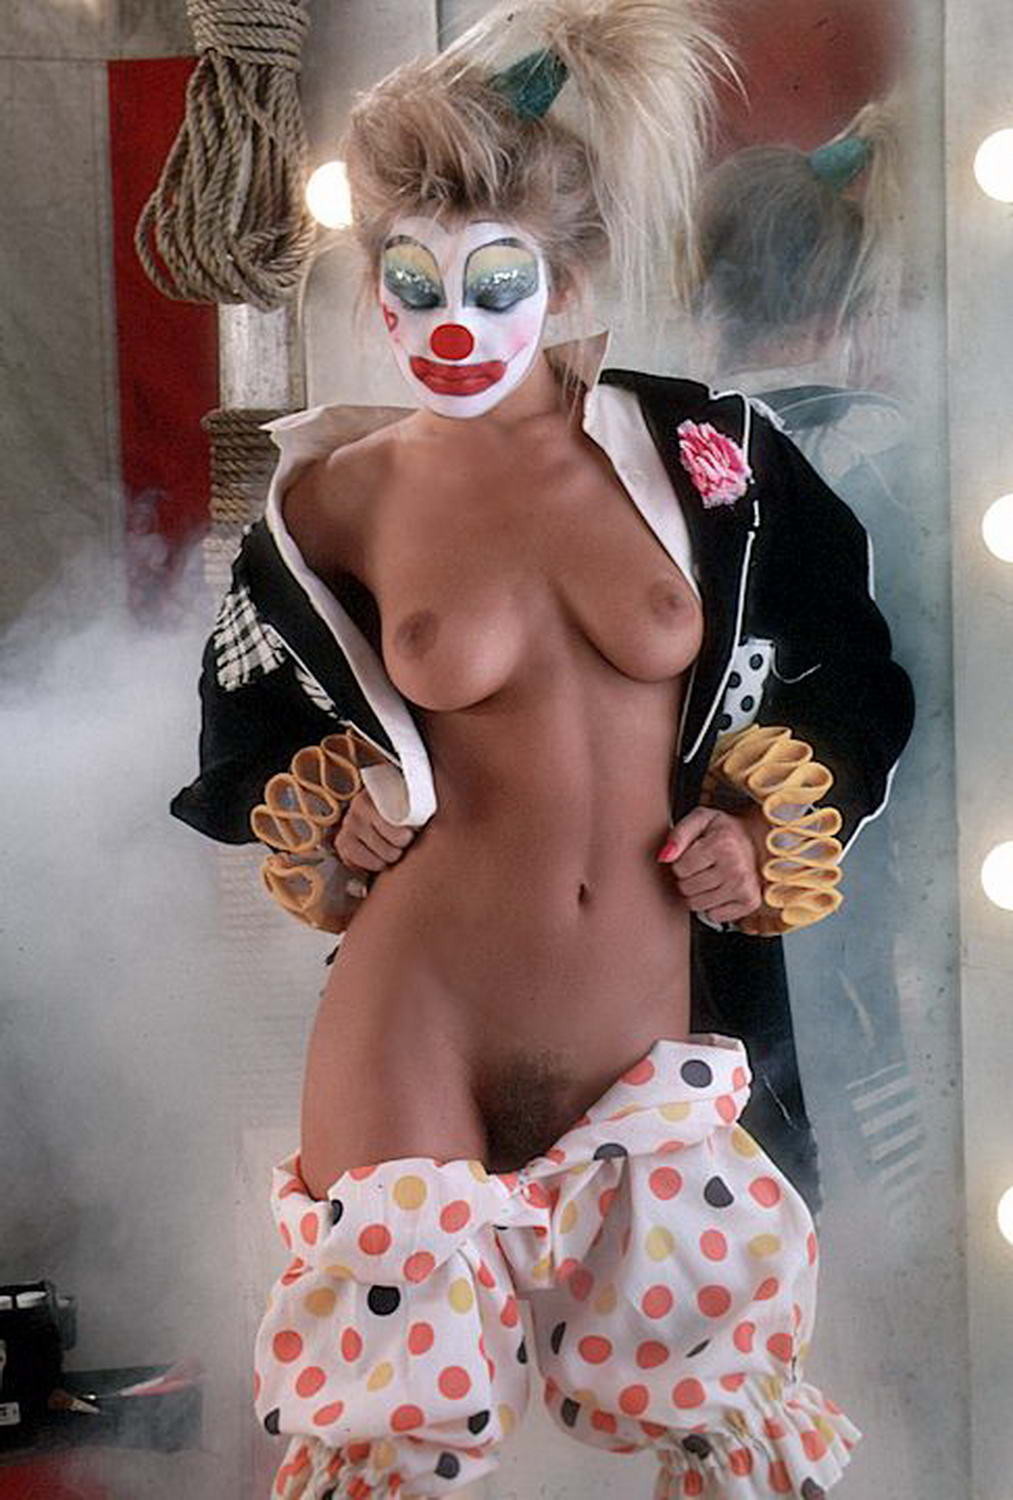 Hot blonde play mate in a clown suit #71248994